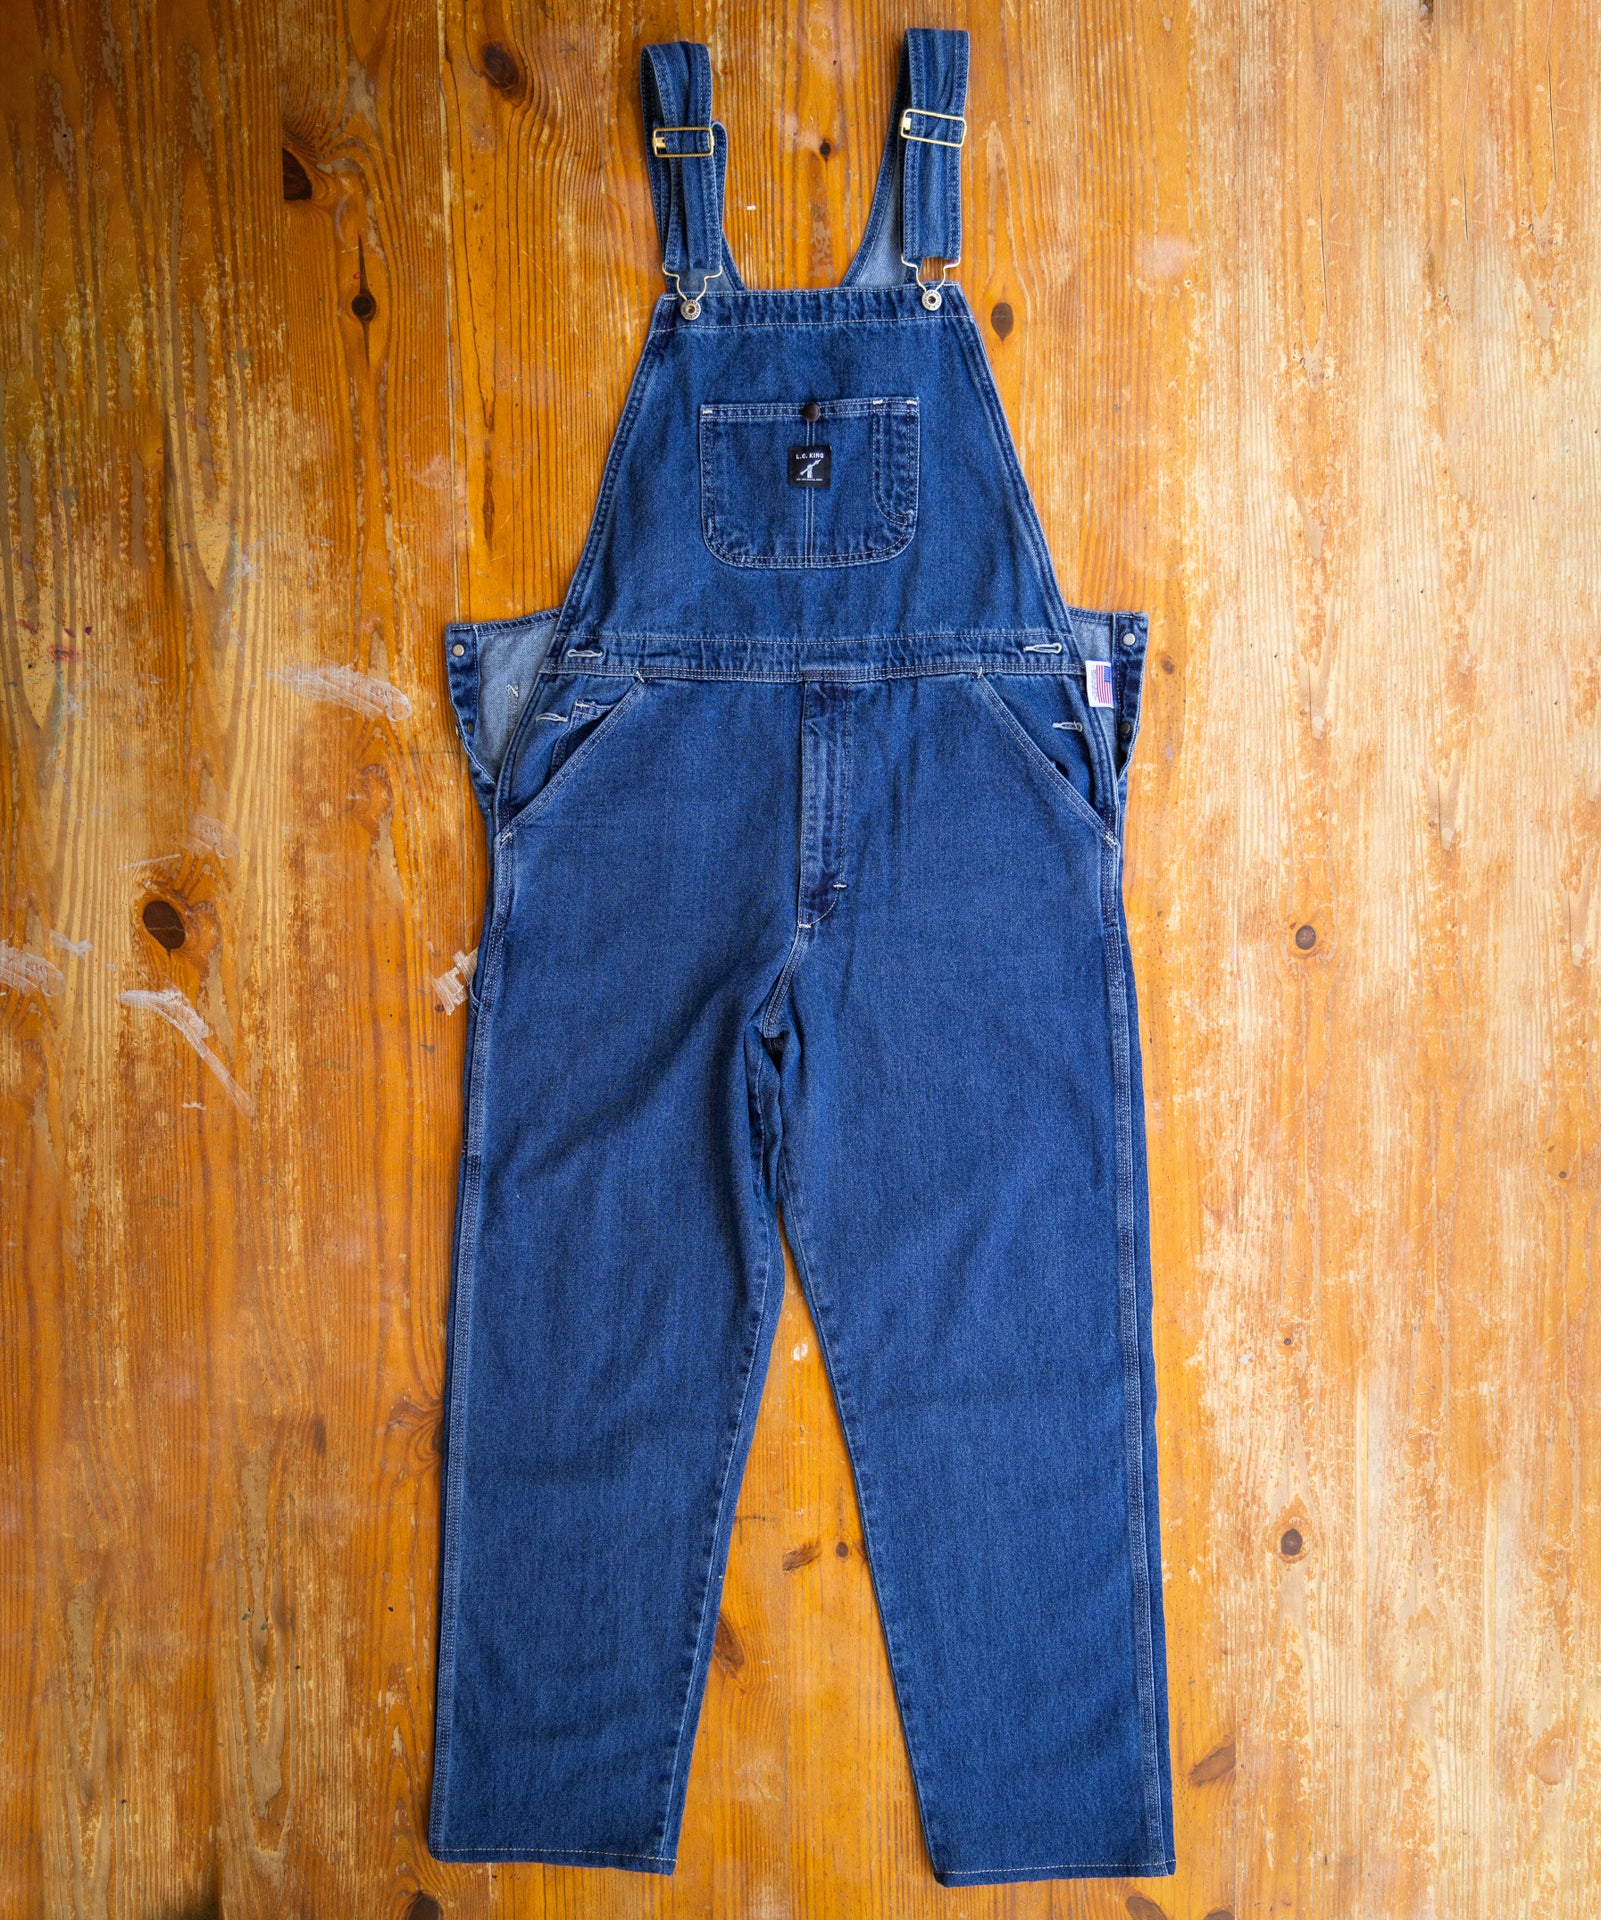 LC King Indigo Denim Tailored Fit High Back Overalls - Washed